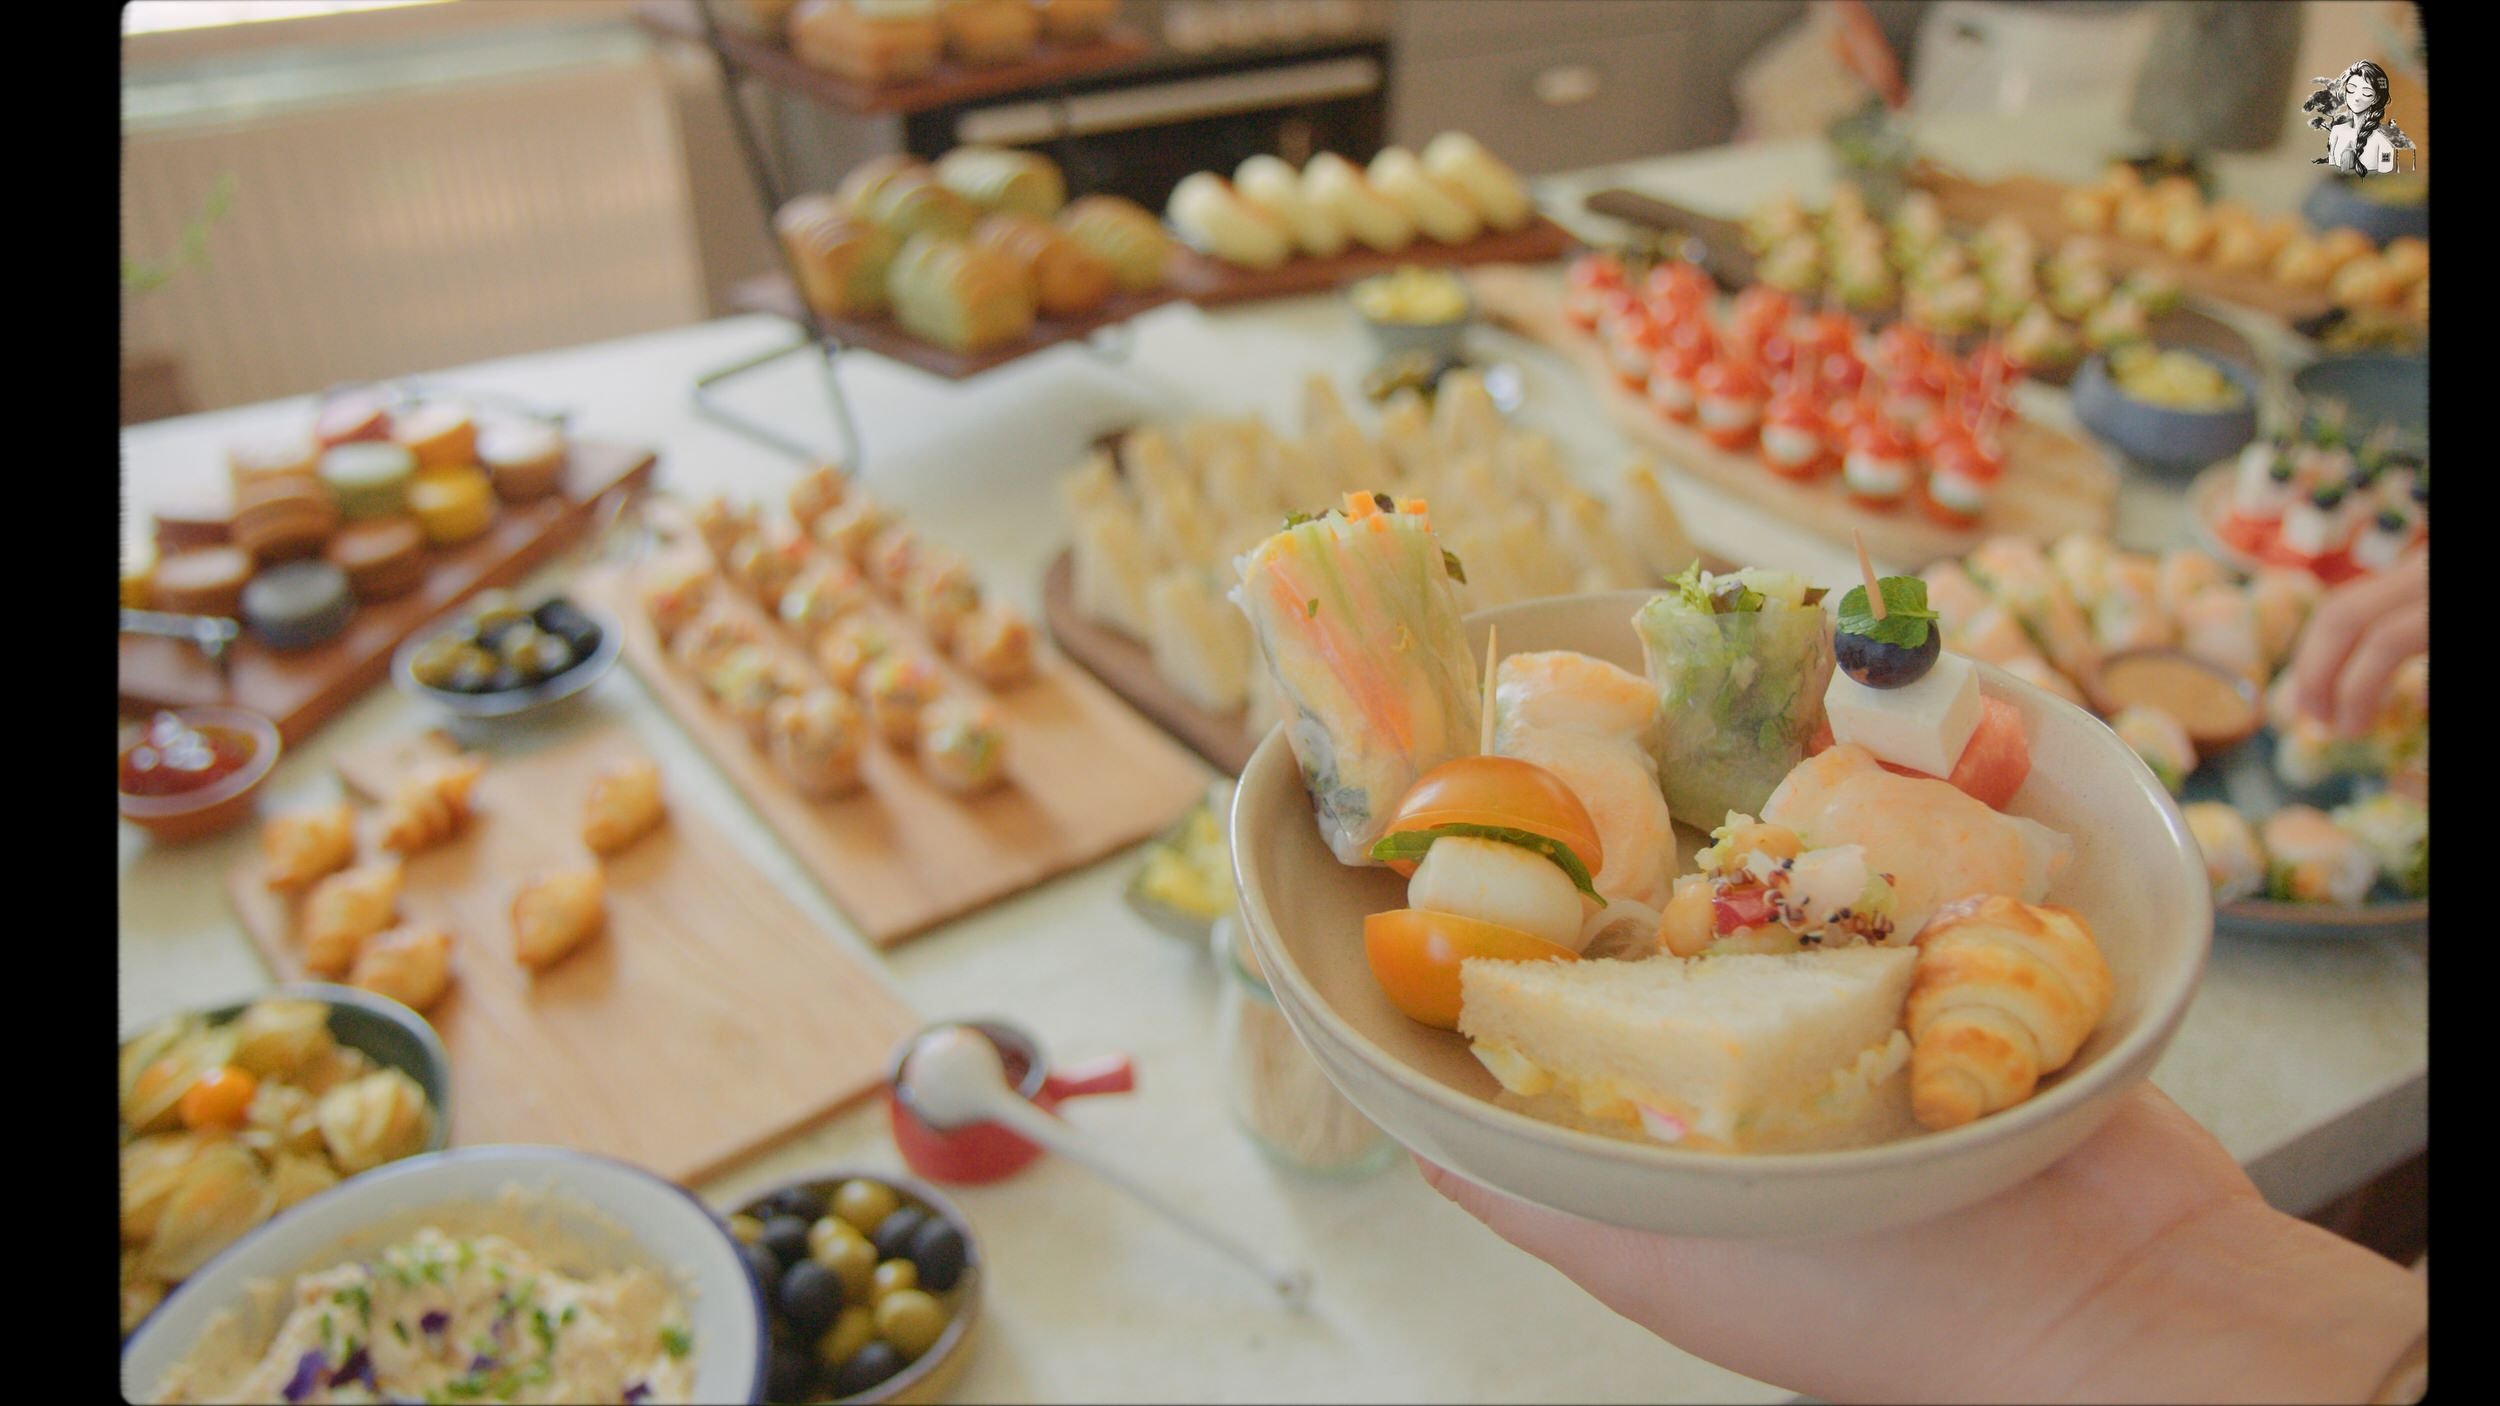 Small Bites Brunch Buffet Ideas for your next party - Her86m2 _1.270.1.jpg